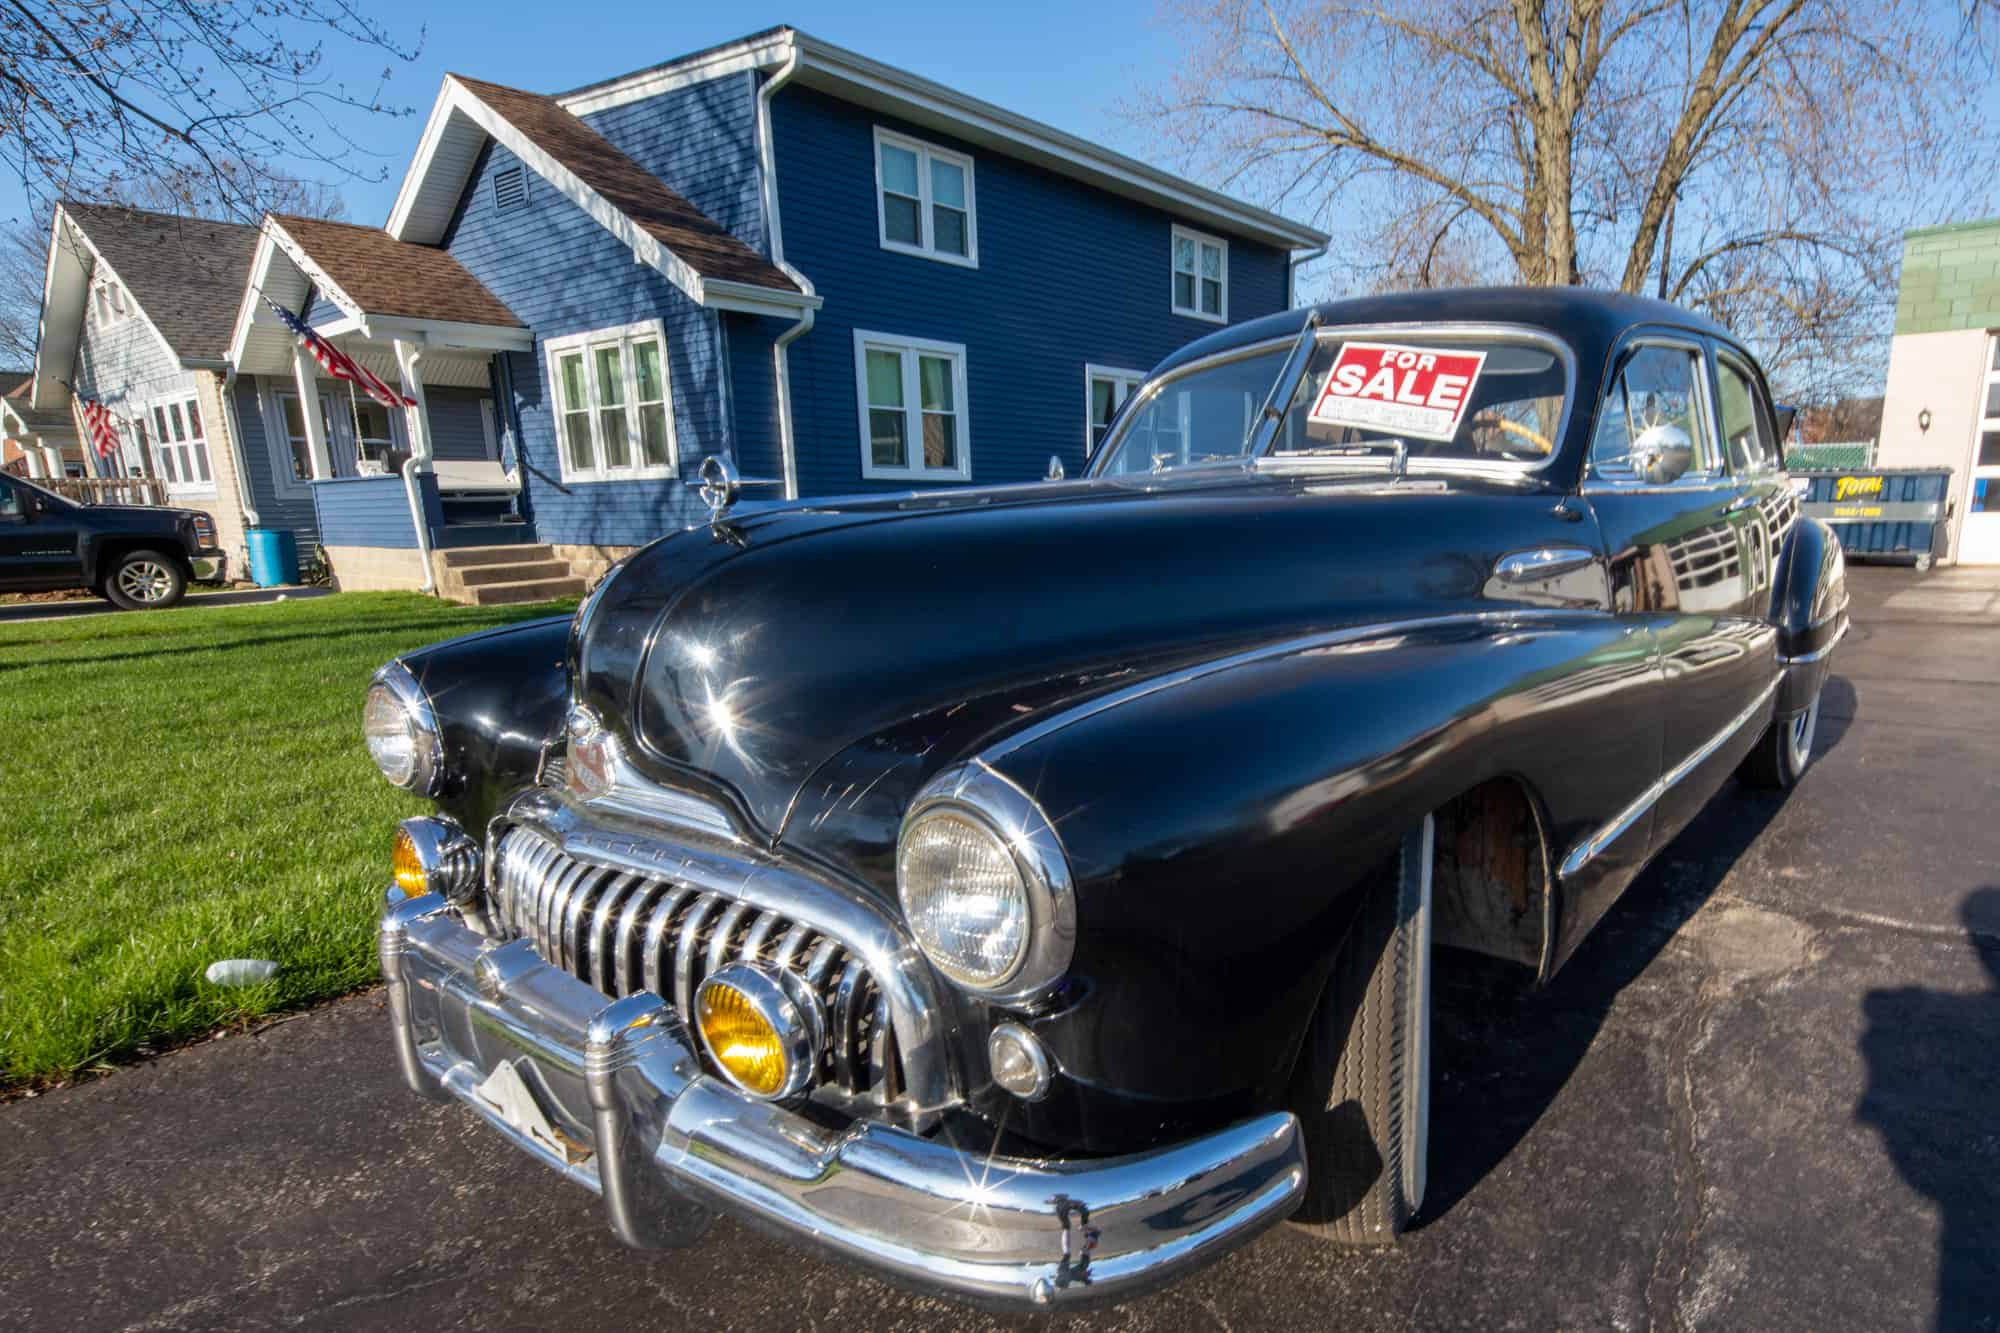 A classic automobile for sale on display at the intersection of Lincoln and 10th. The home behind its modern colors pair with its black finish for an attractive sight as one turns left heading to the lake.